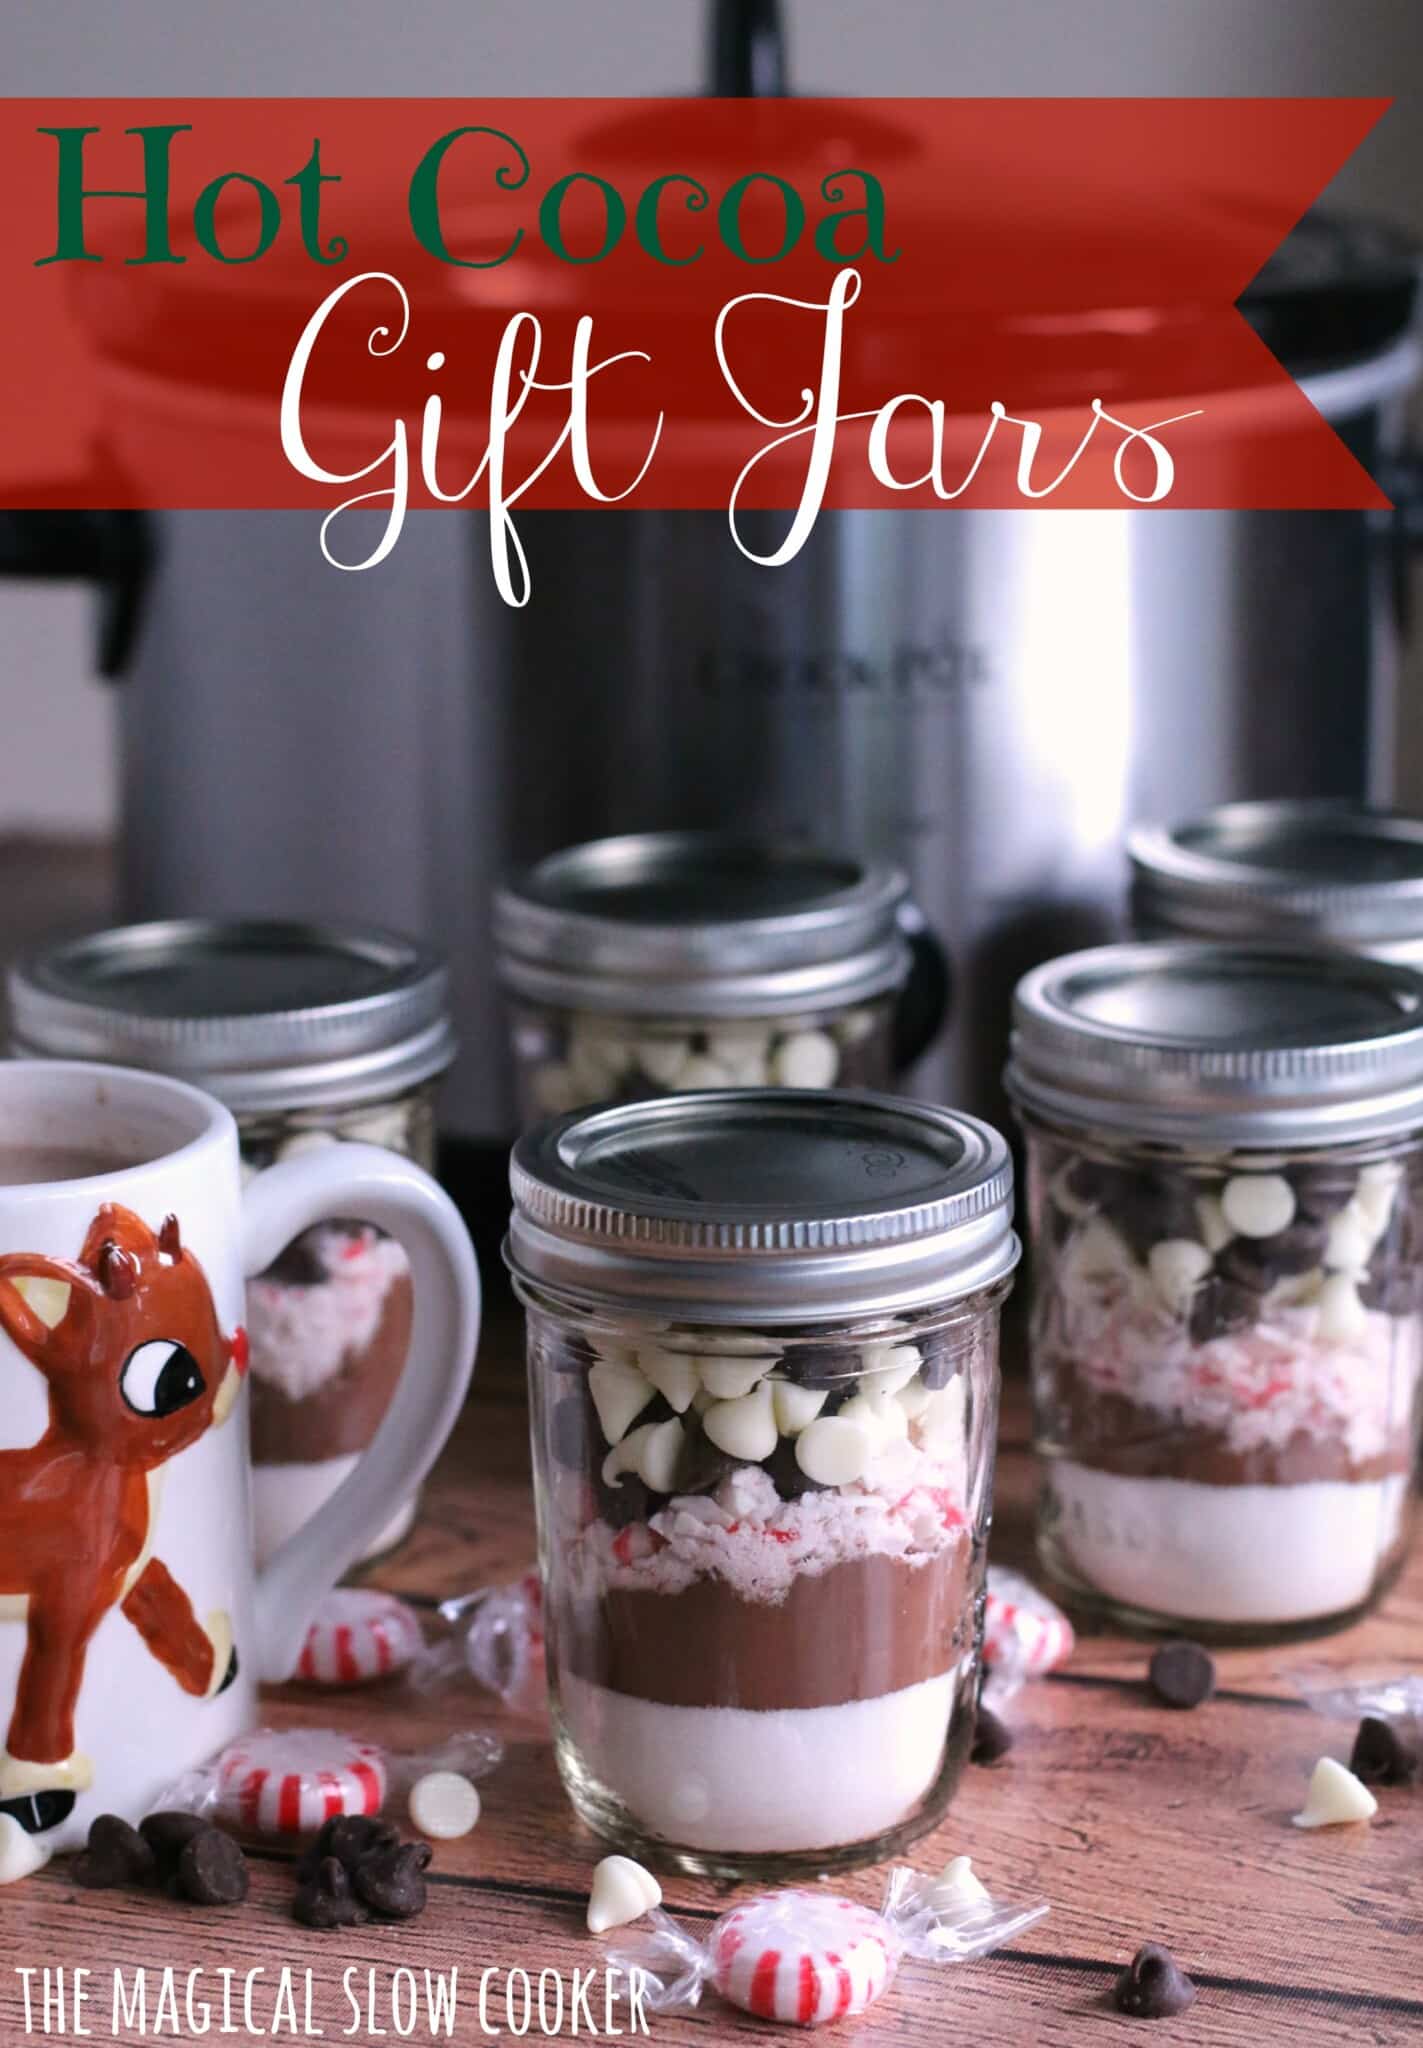 Hot Cocoa Gift Jars - The Magical Slow Cooker